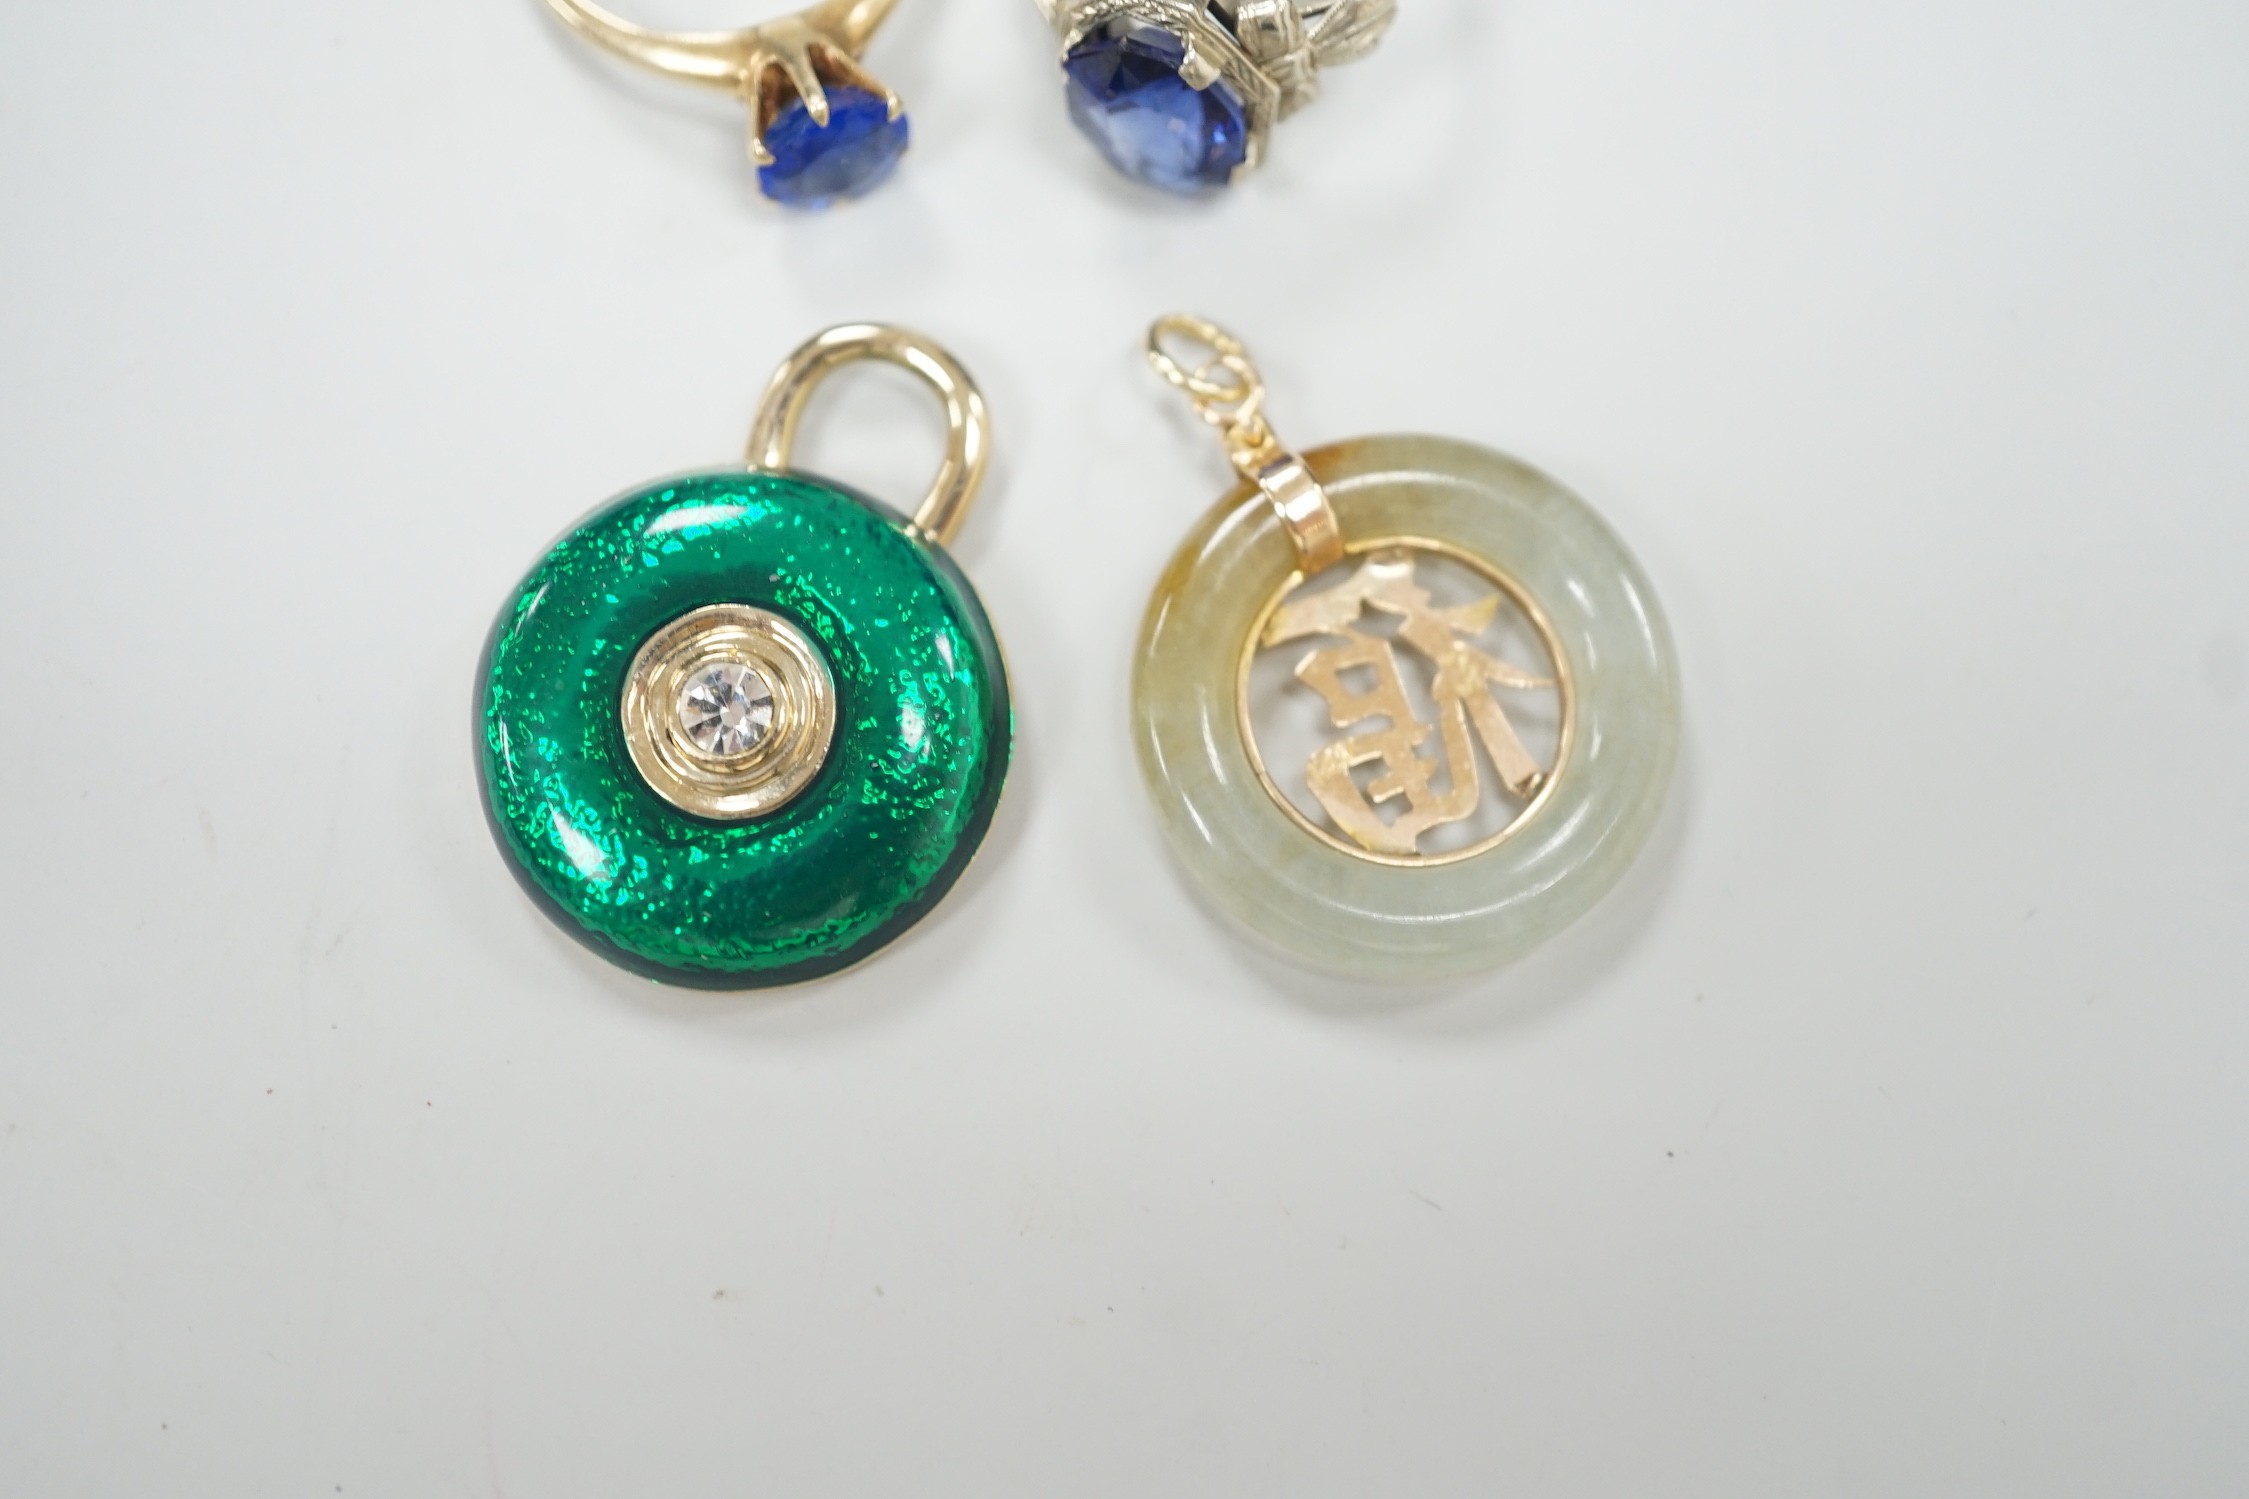 A 14k white metal and oval cut synthetic sapphire ring, a yellow metal and blue paste ring, a 585 yellow metal and jadeite pendant and a costume pendant.